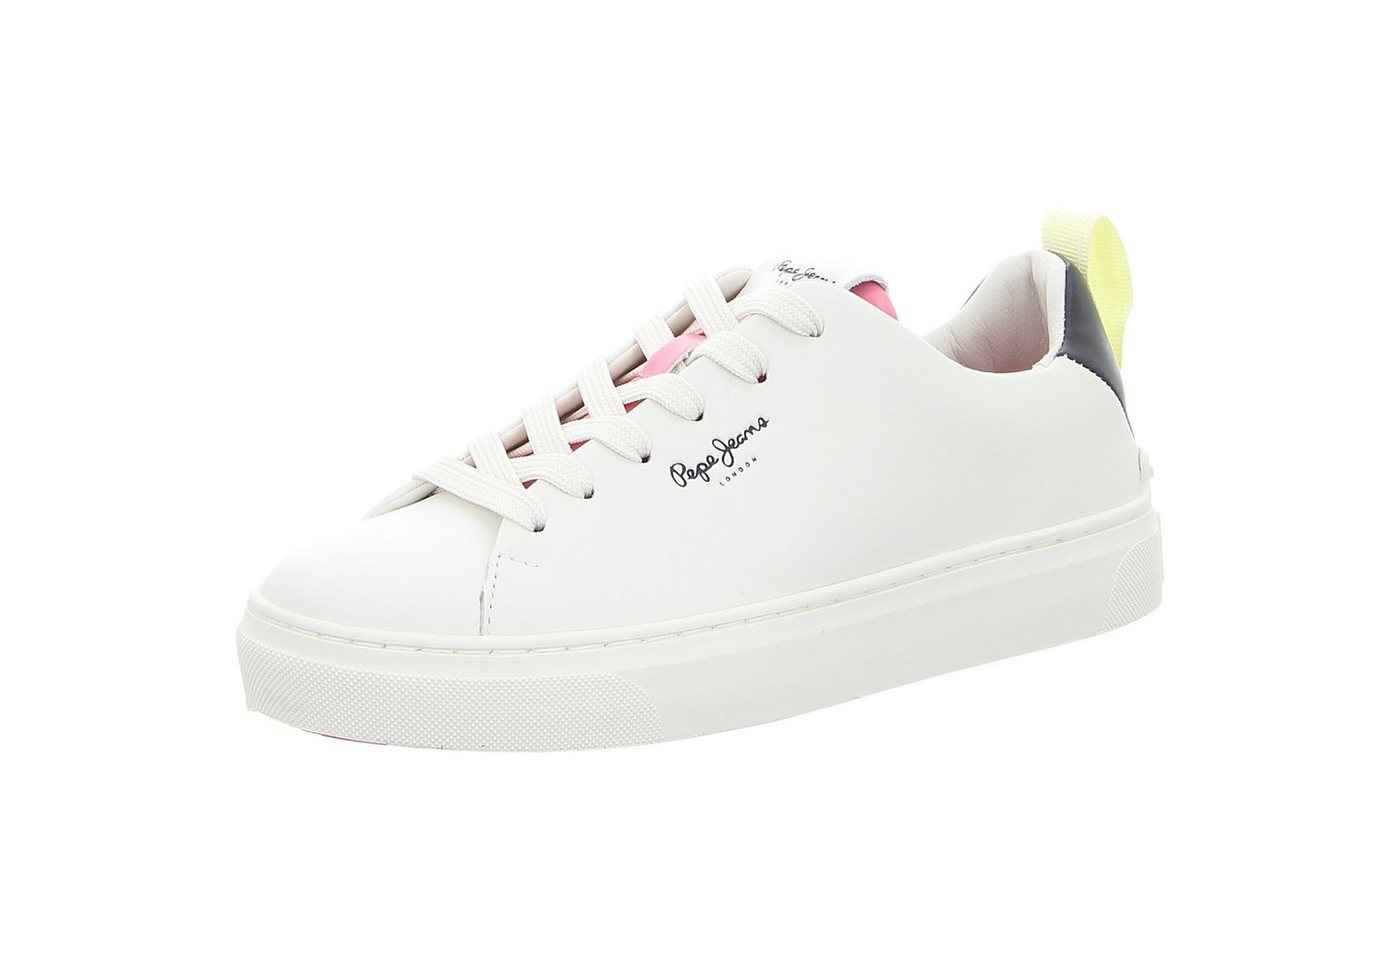 Pepe Jeans Camden Action W Sneaker von Pepe Jeans